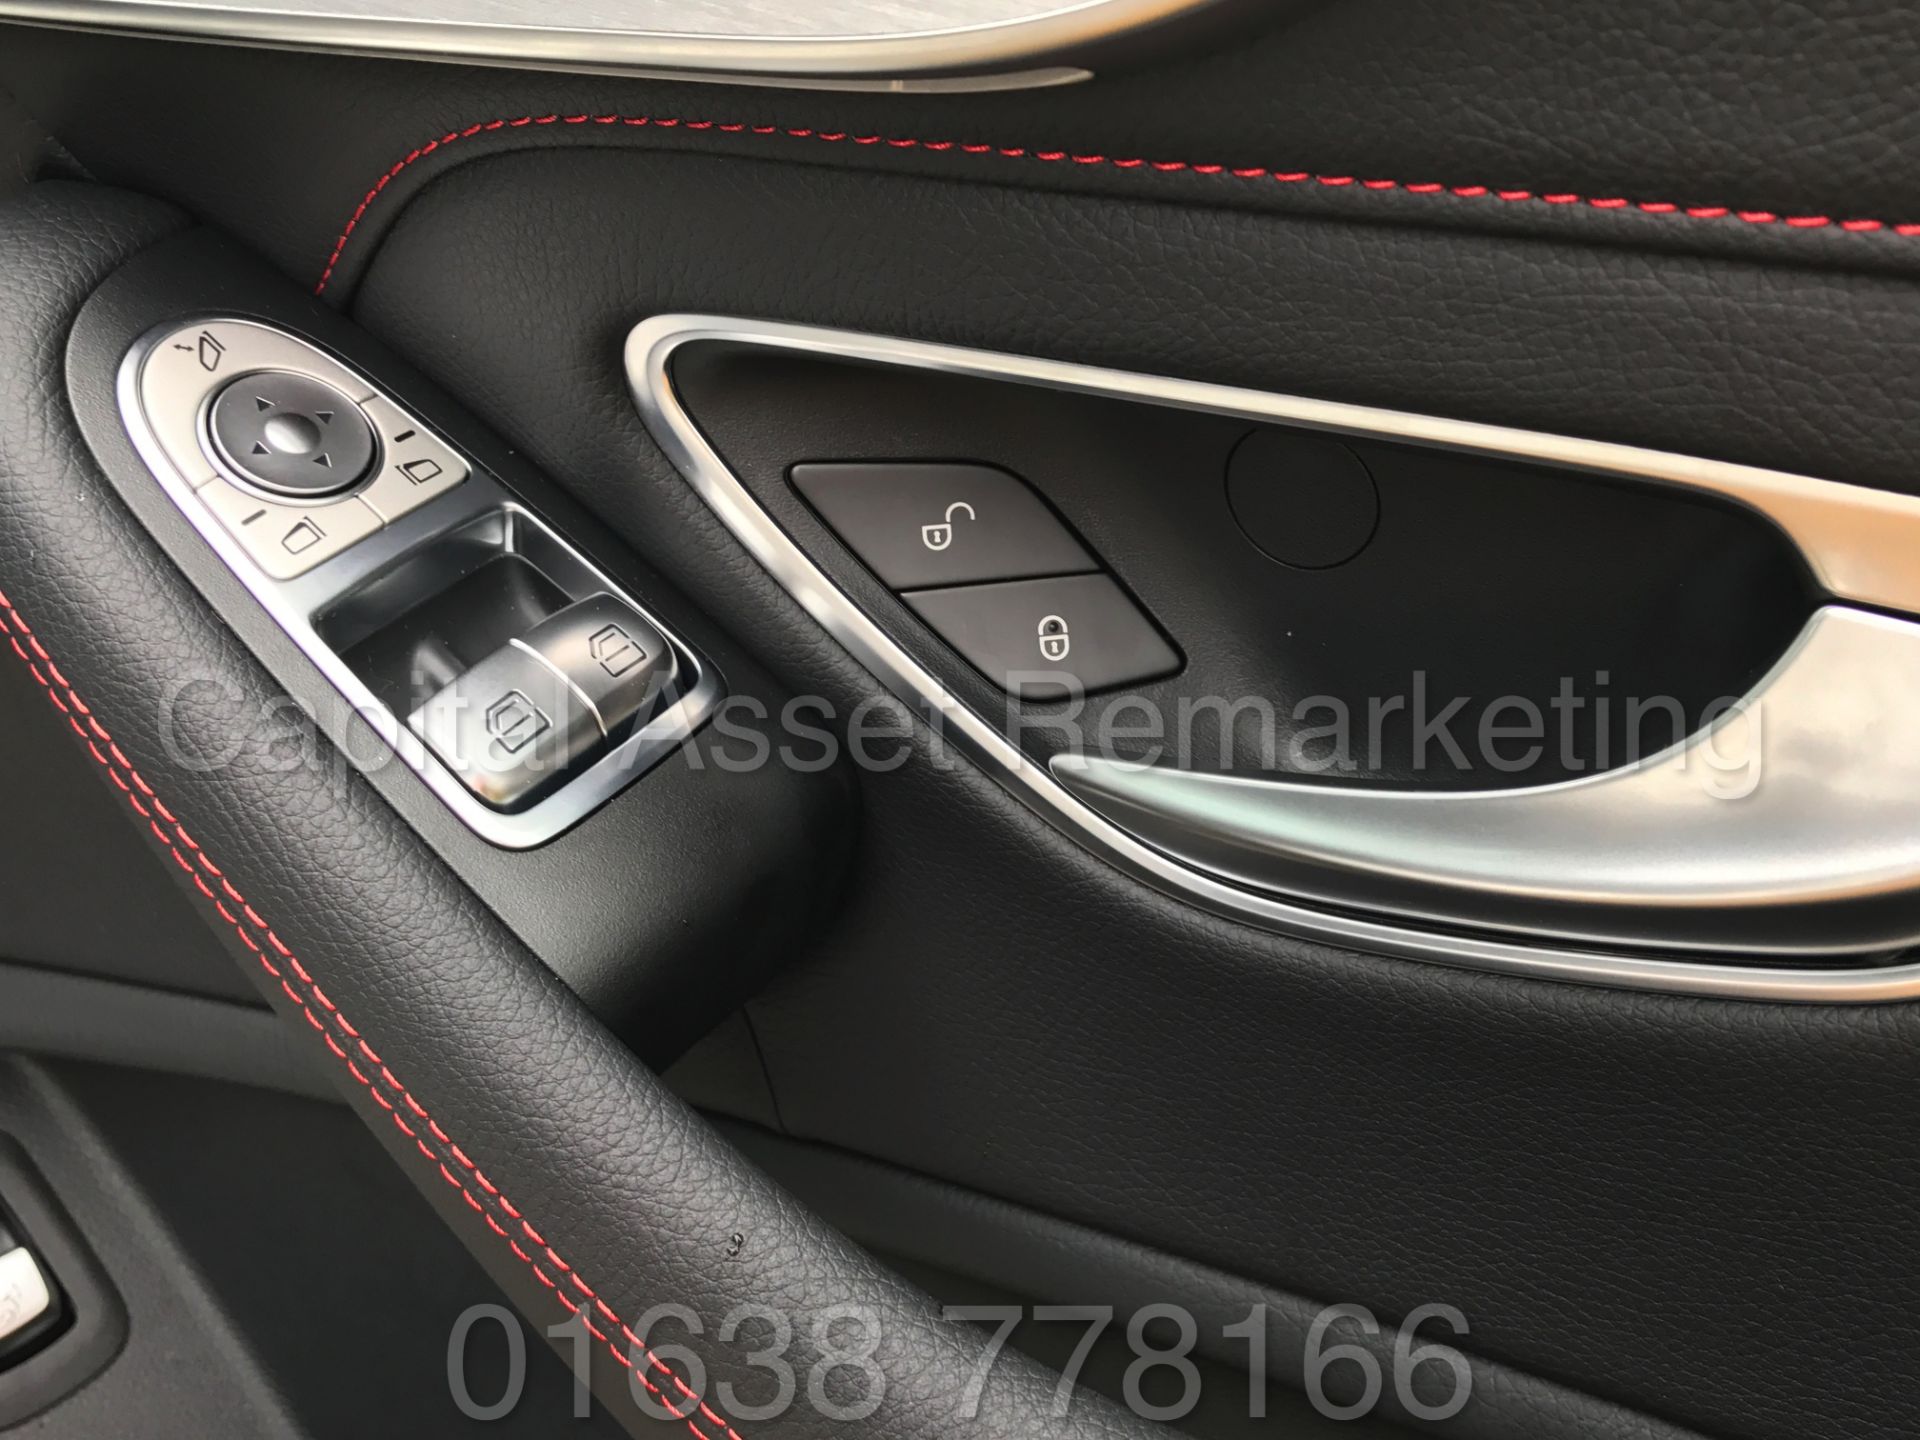 MEREDES-BENZ C43 AMG PREMIUM '4 MATIC' COUPE (2017) '9-G AUTO - LEATHER - SAT NAV' **FULLY LOADED** - Image 44 of 57